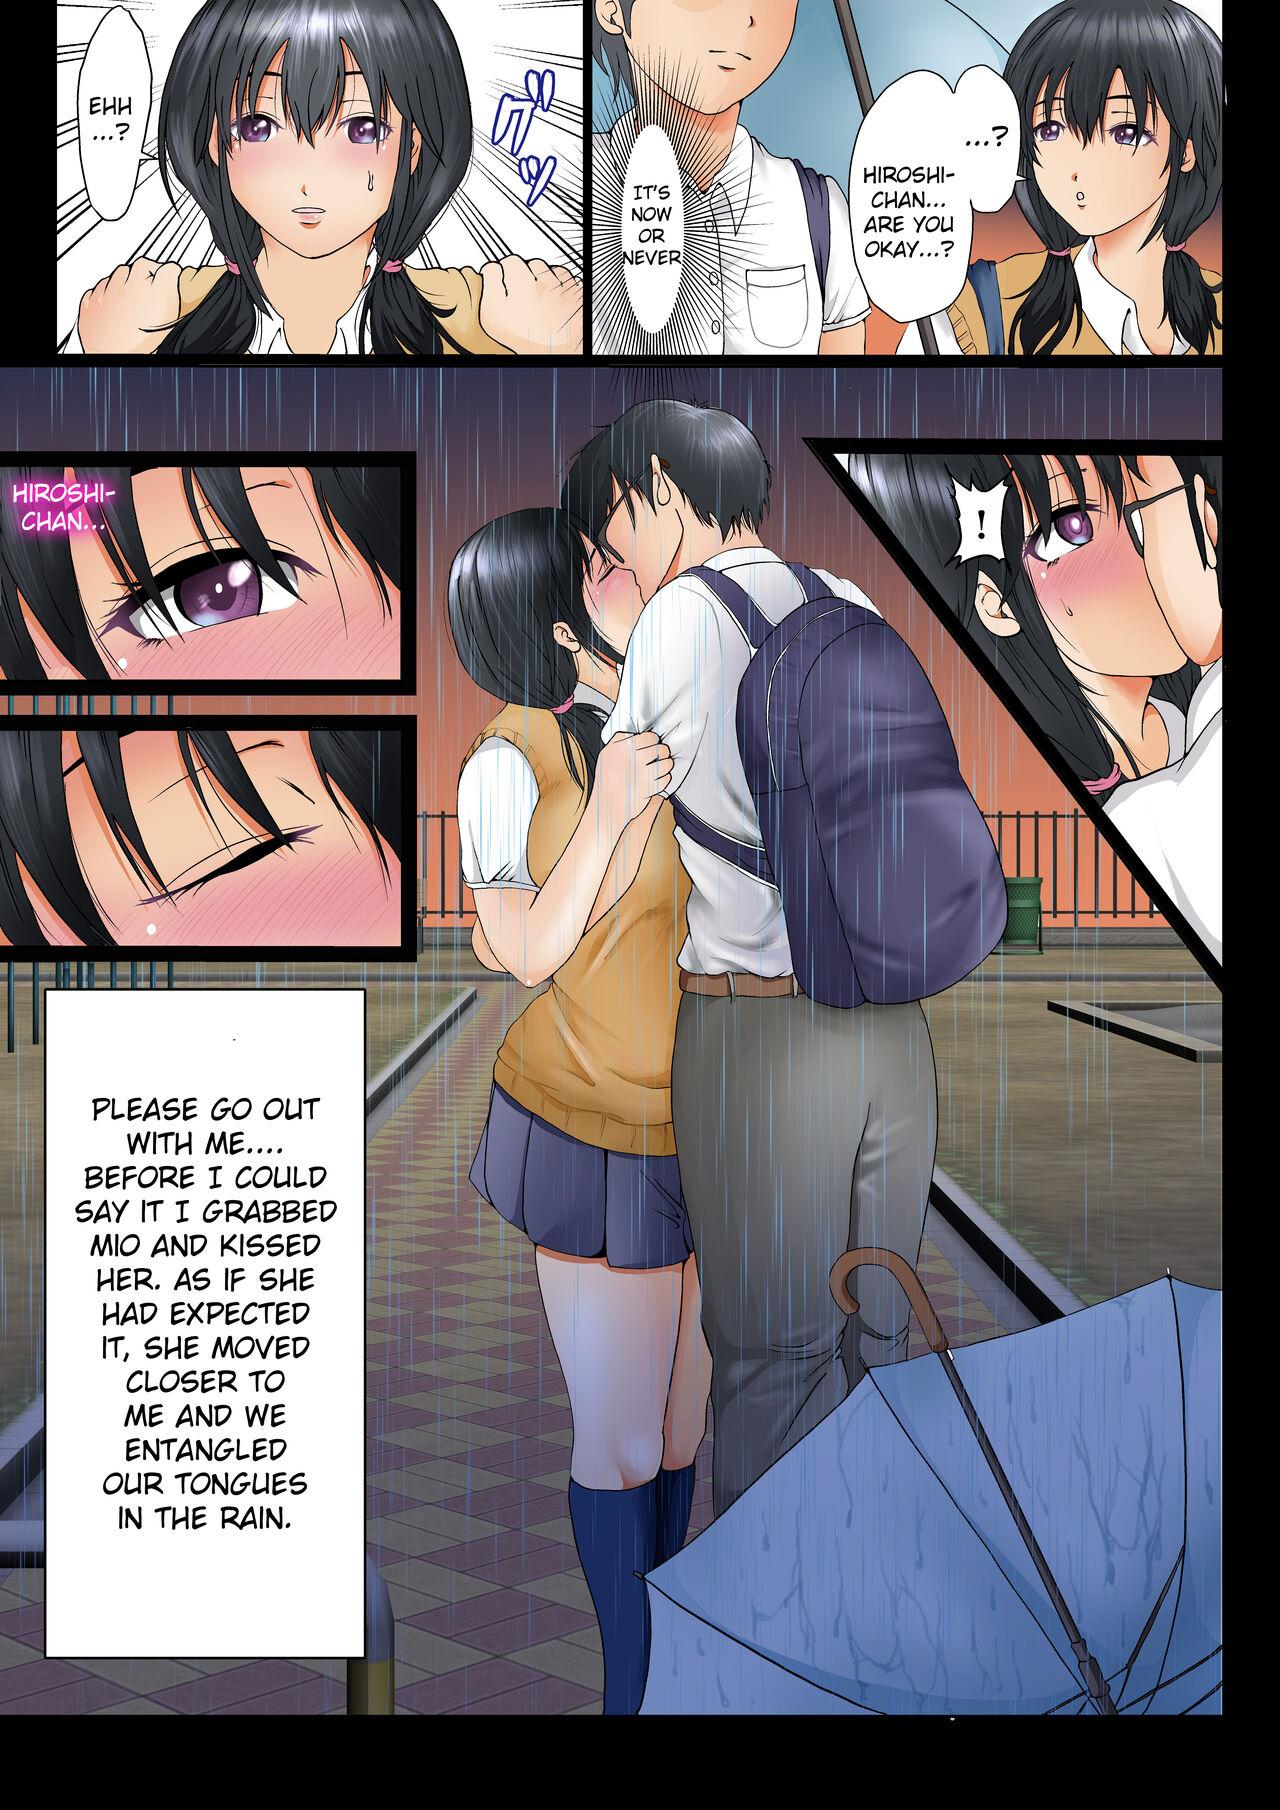 Double Penetration The reason why the bond with my childhood friend is broken so easily - Original Free - Page 12